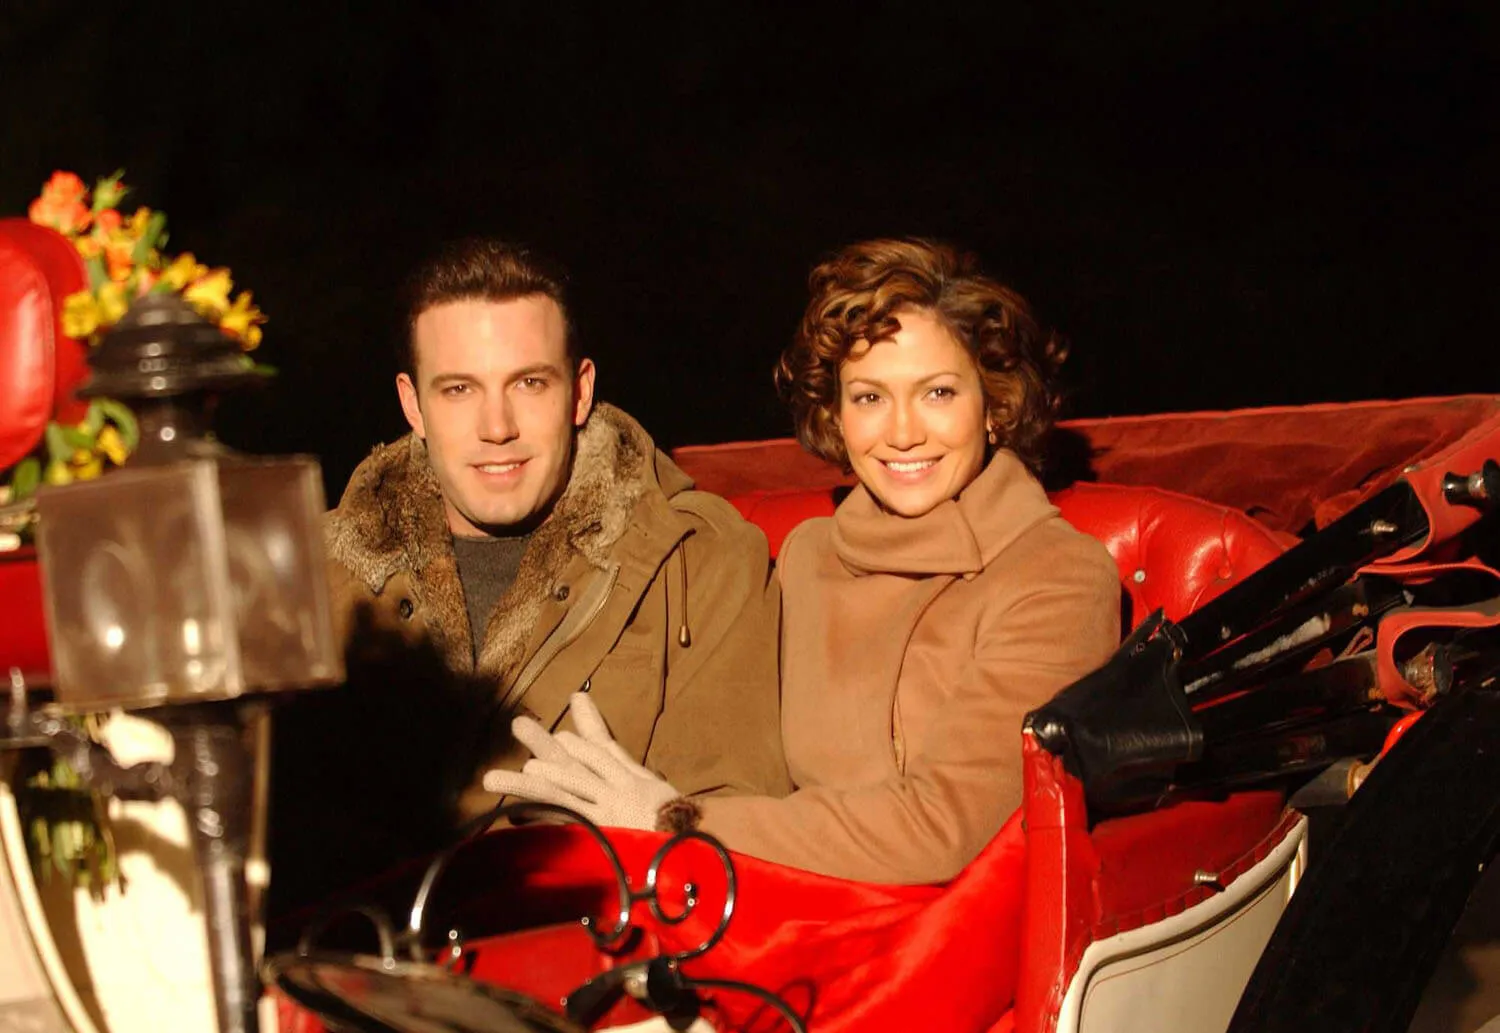 Ben Affleck and Jennifer Lopez smiling while riding a horse carriage in 2002